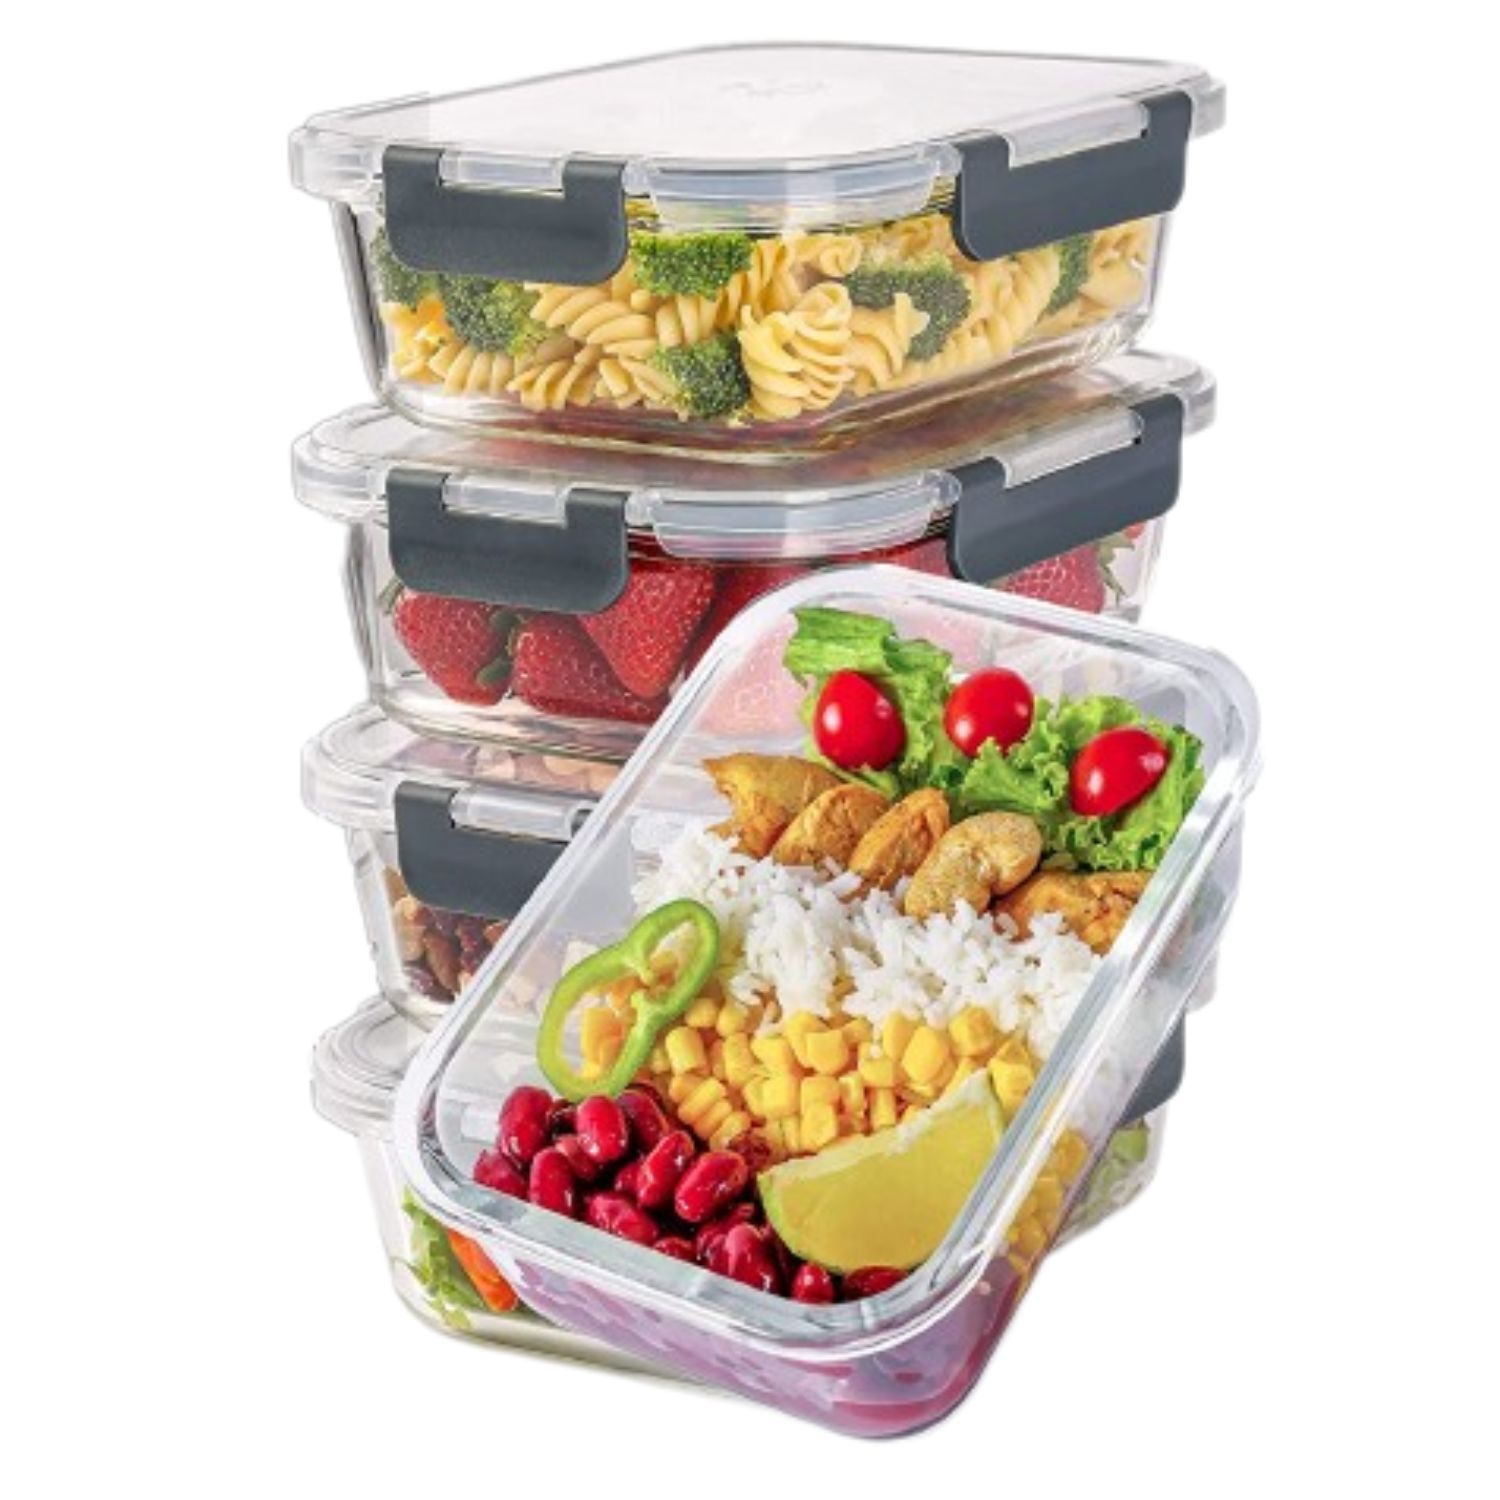 Bentgo Glass Salad Container, 2-pack On sale now for $29.99 after